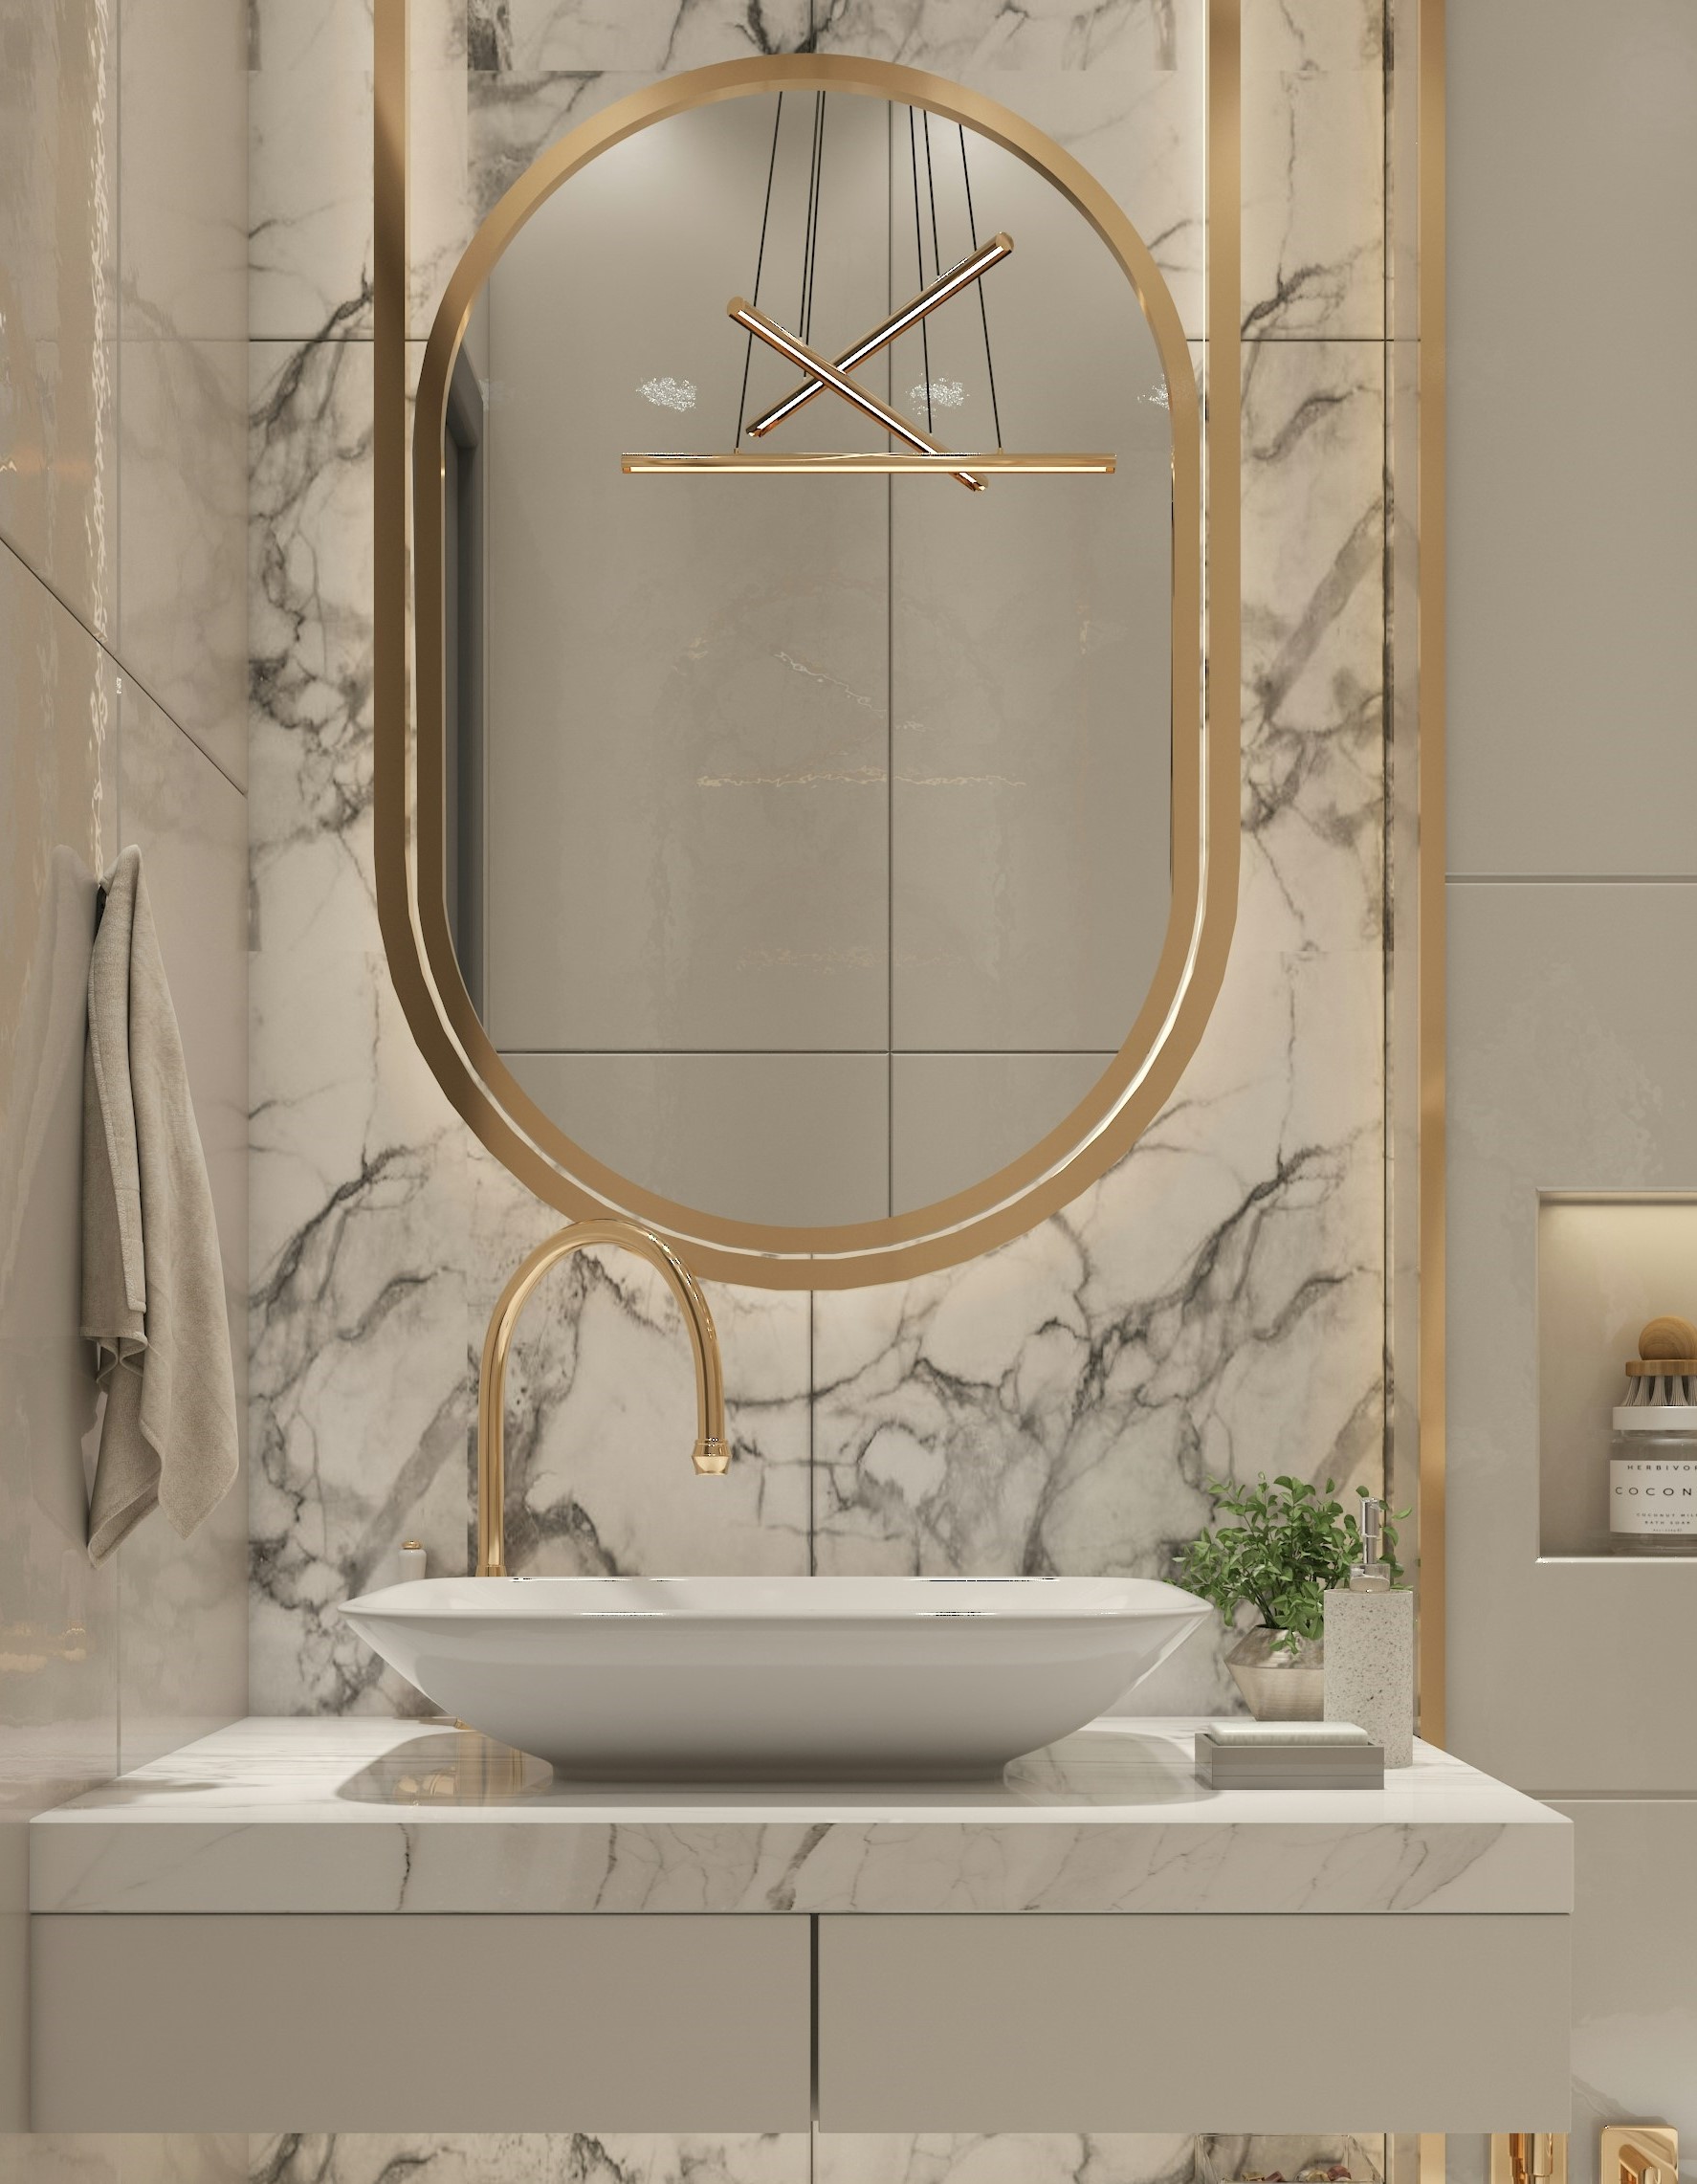 Add a touch of glamor and luxury with gold accents on mirrors, light fixture, etc.